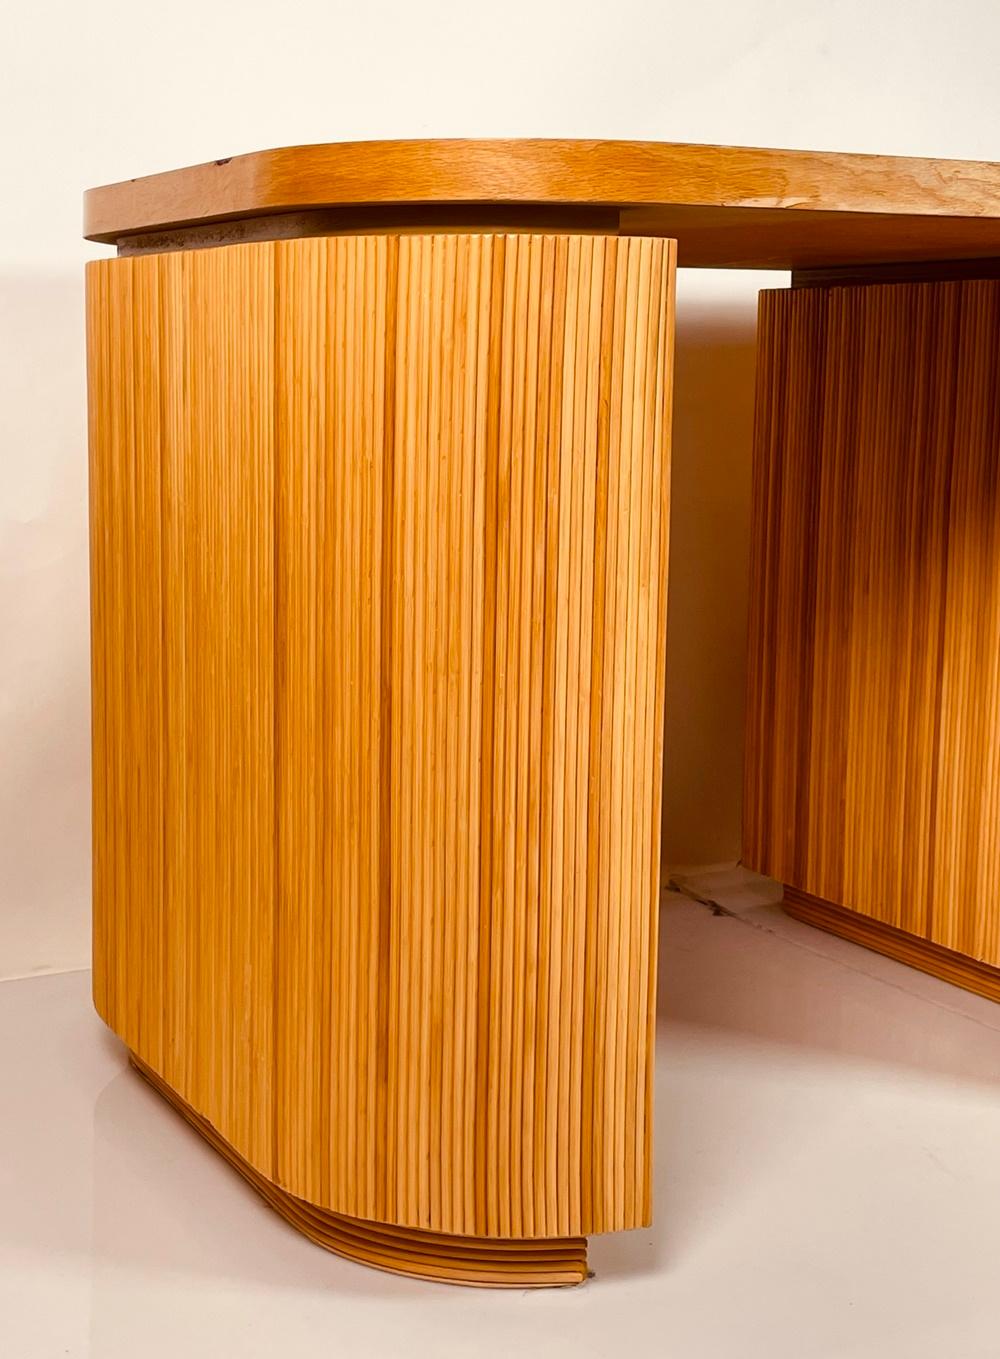 Pencil Reed Executive Desk in the Style of Karl Springer, USA 1970's For Sale 6